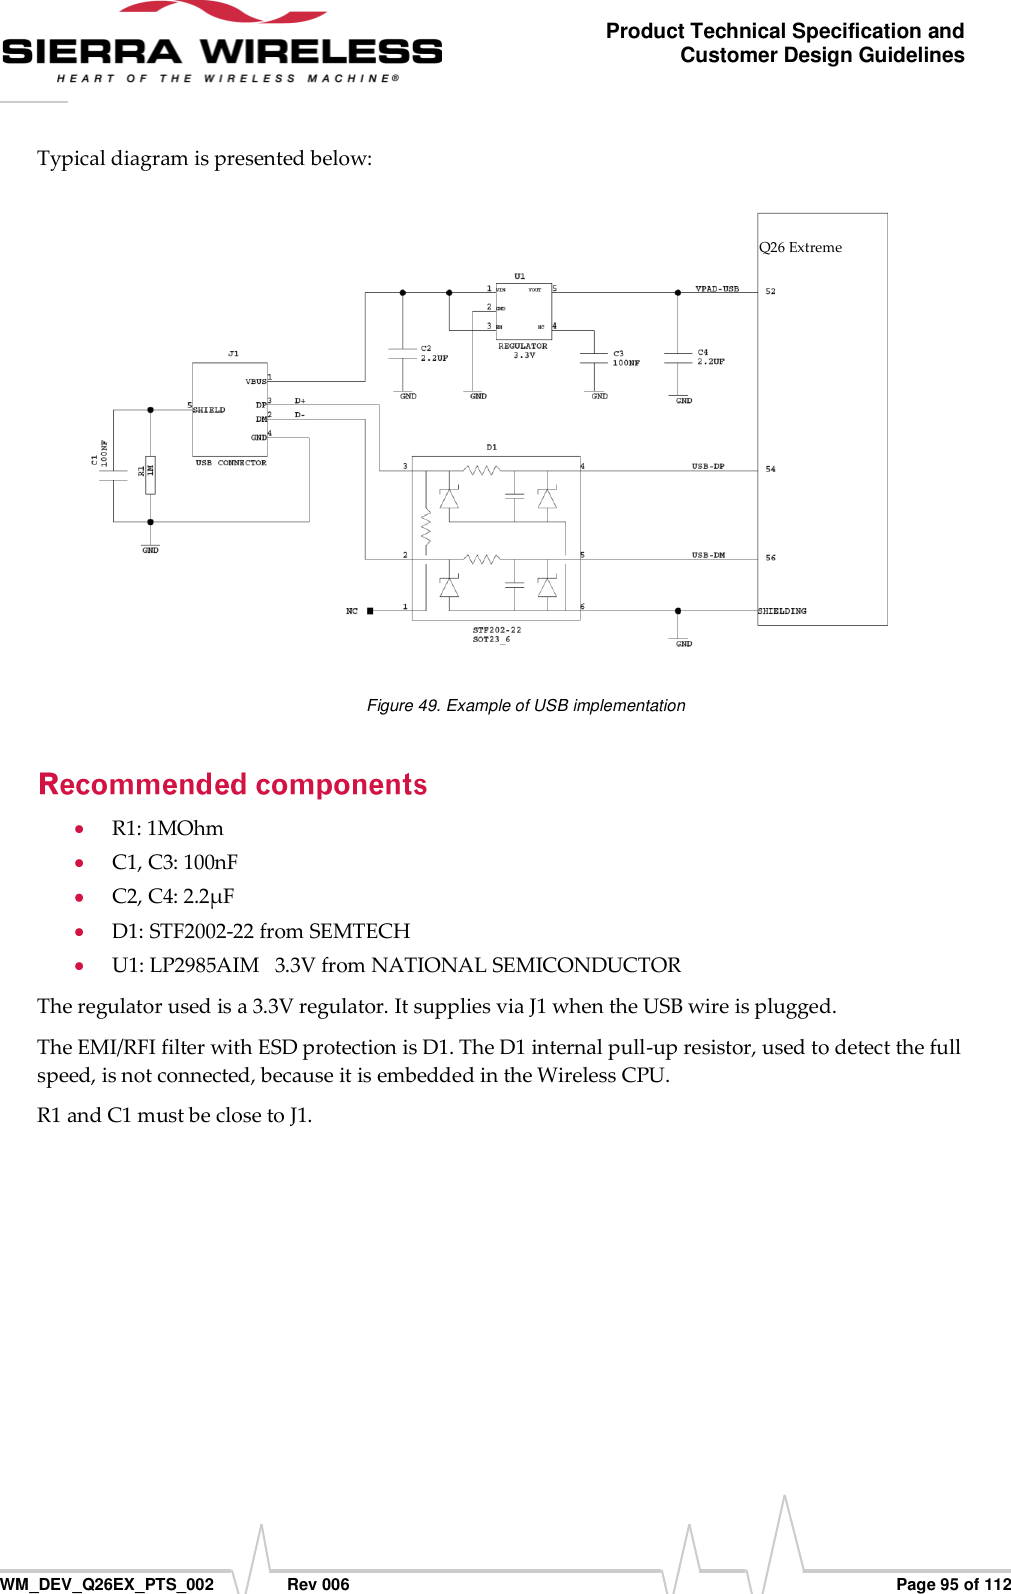      WM_DEV_Q26EX_PTS_002  Rev 006  Page 95 of 112 Product Technical Specification and Customer Design Guidelines Typical diagram is presented below:  Figure 49. Example of USB implementation  R1: 1MOhm  C1, C3: 100nF  C2, C4: 2.2µF  D1: STF2002-22 from SEMTECH  U1: LP2985AIM   3.3V from NATIONAL SEMICONDUCTOR The regulator used is a 3.3V regulator. It supplies via J1 when the USB wire is plugged. The EMI/RFI filter with ESD protection is D1. The D1 internal pull-up resistor, used to detect the full speed, is not connected, because it is embedded in the Wireless CPU. R1 and C1 must be close to J1.  Q26 Extreme 